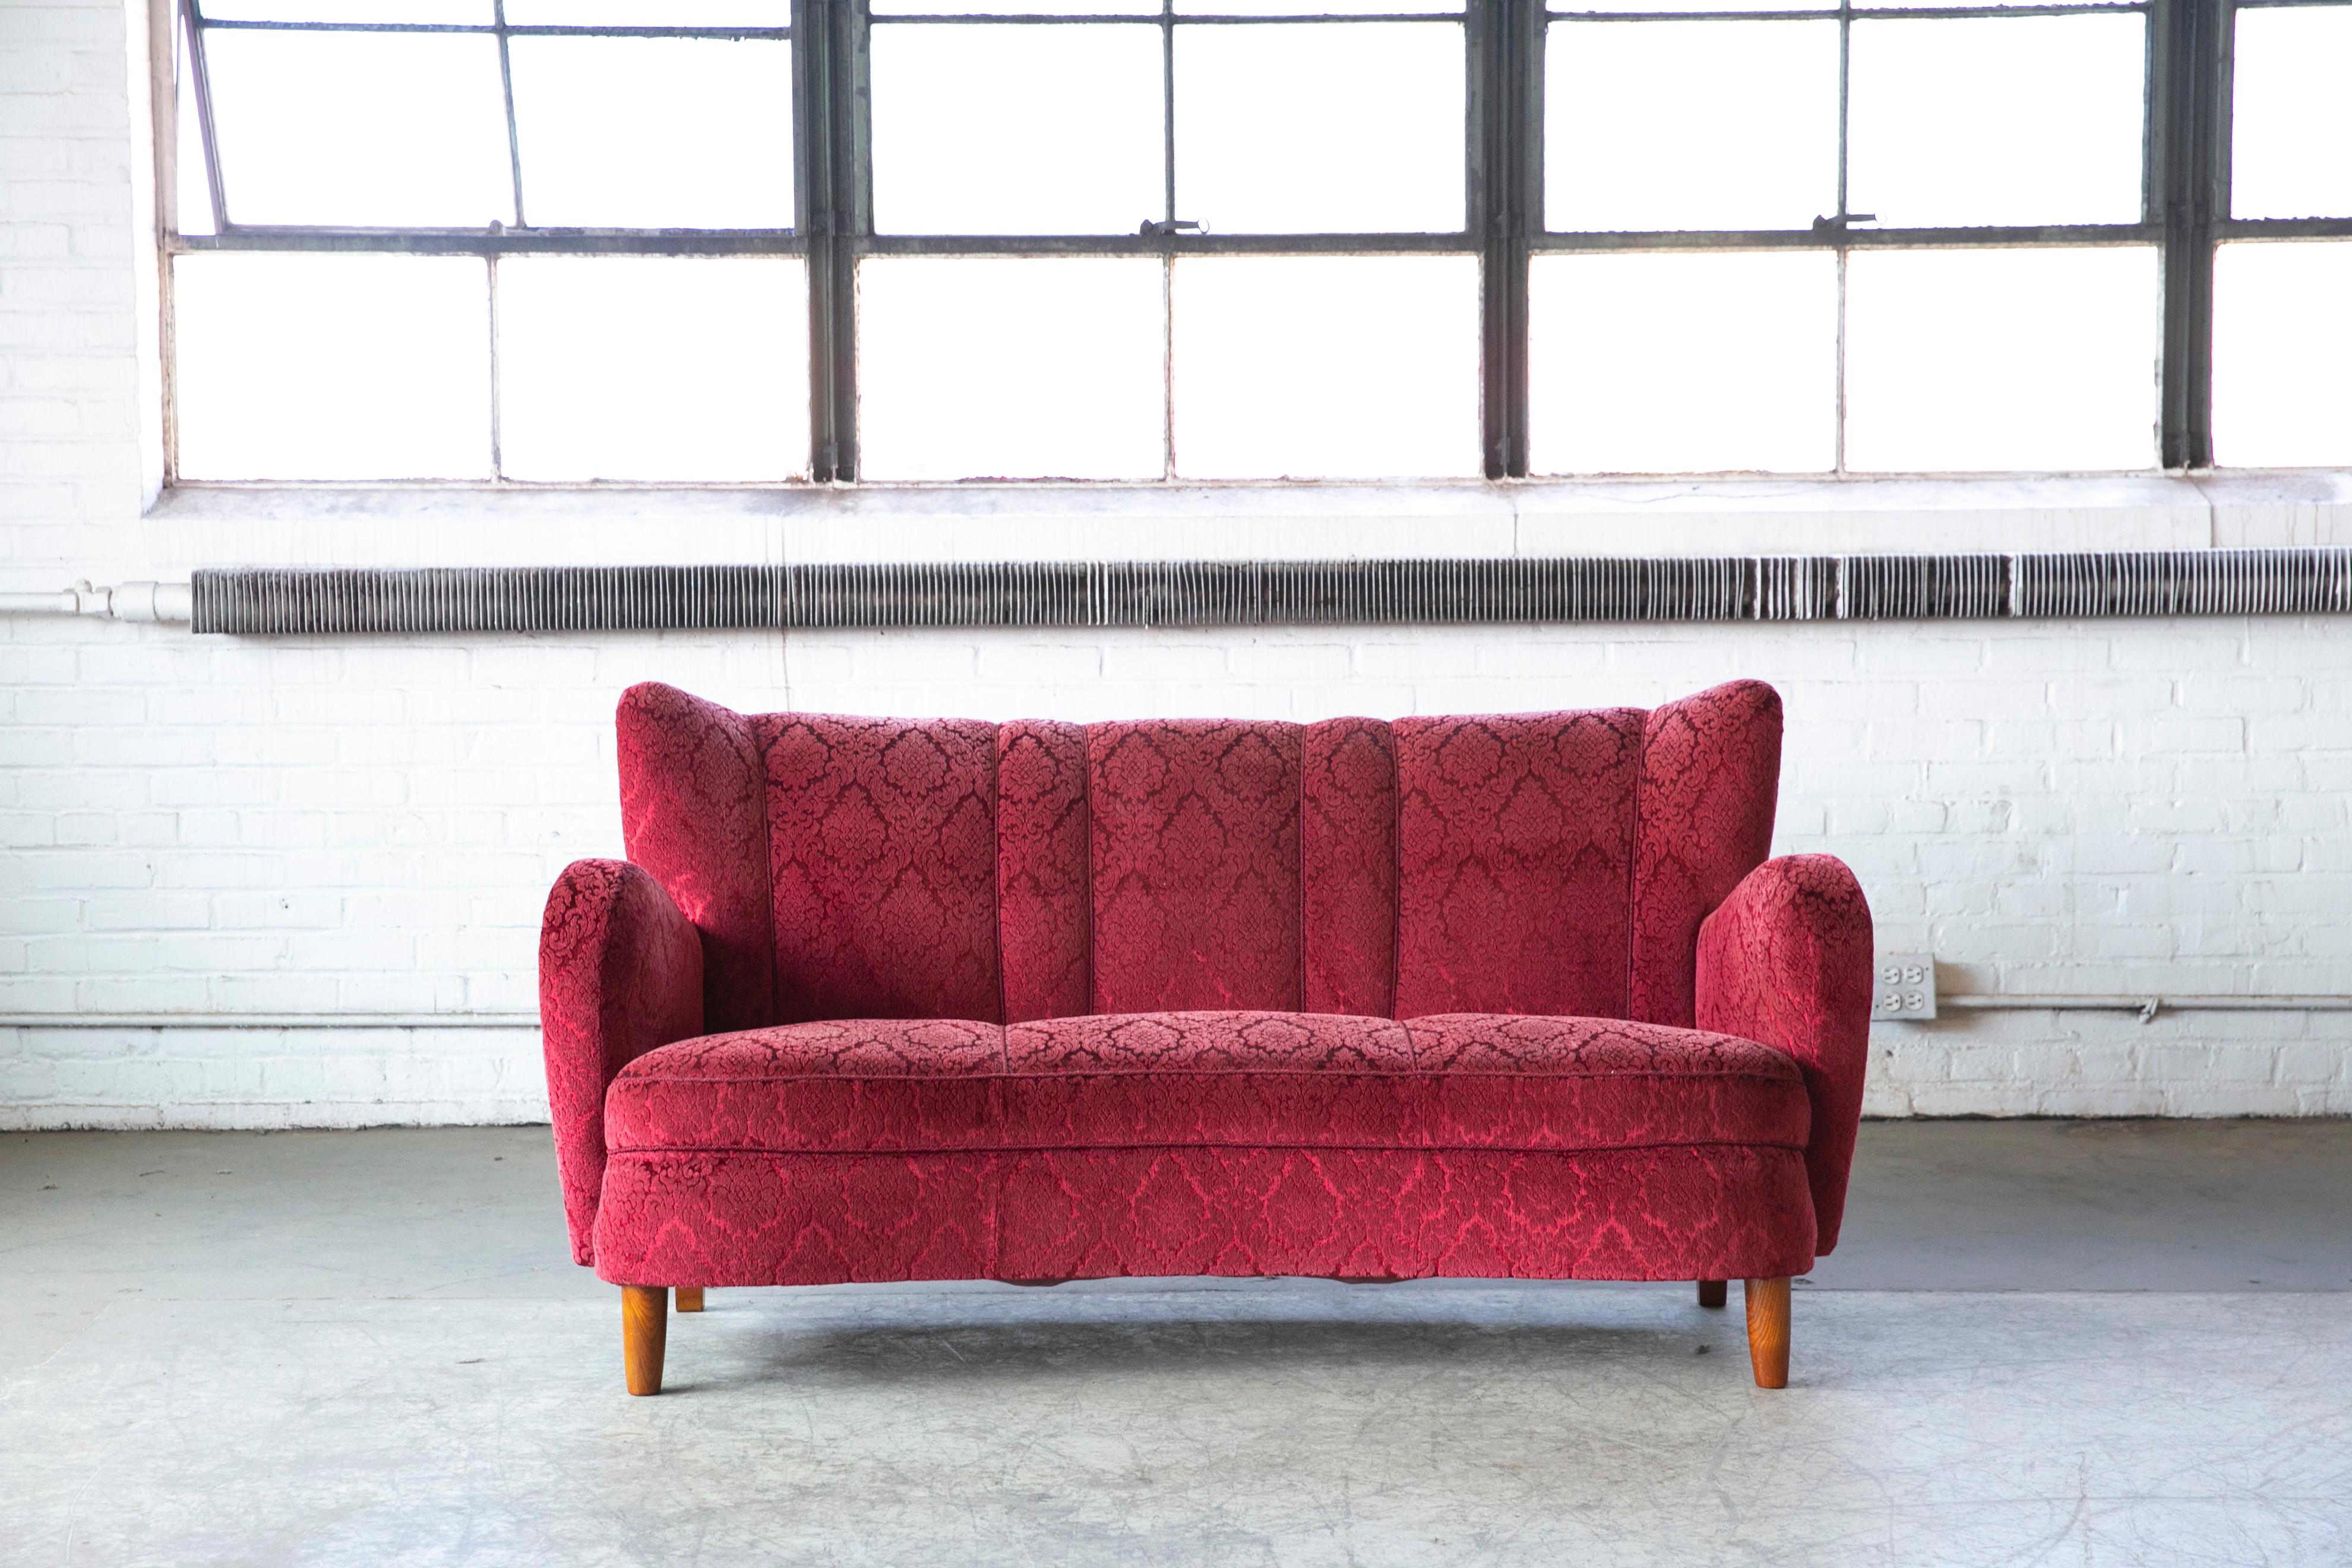 Beautiful and very elegant 1940s curved sofa/loveseat in red mohair wool fabric. The sofa has springs in the seat and the backrest and the cushions are nice and firm and the sofa very sturdy. The mohair fabric is in very clean usable condition